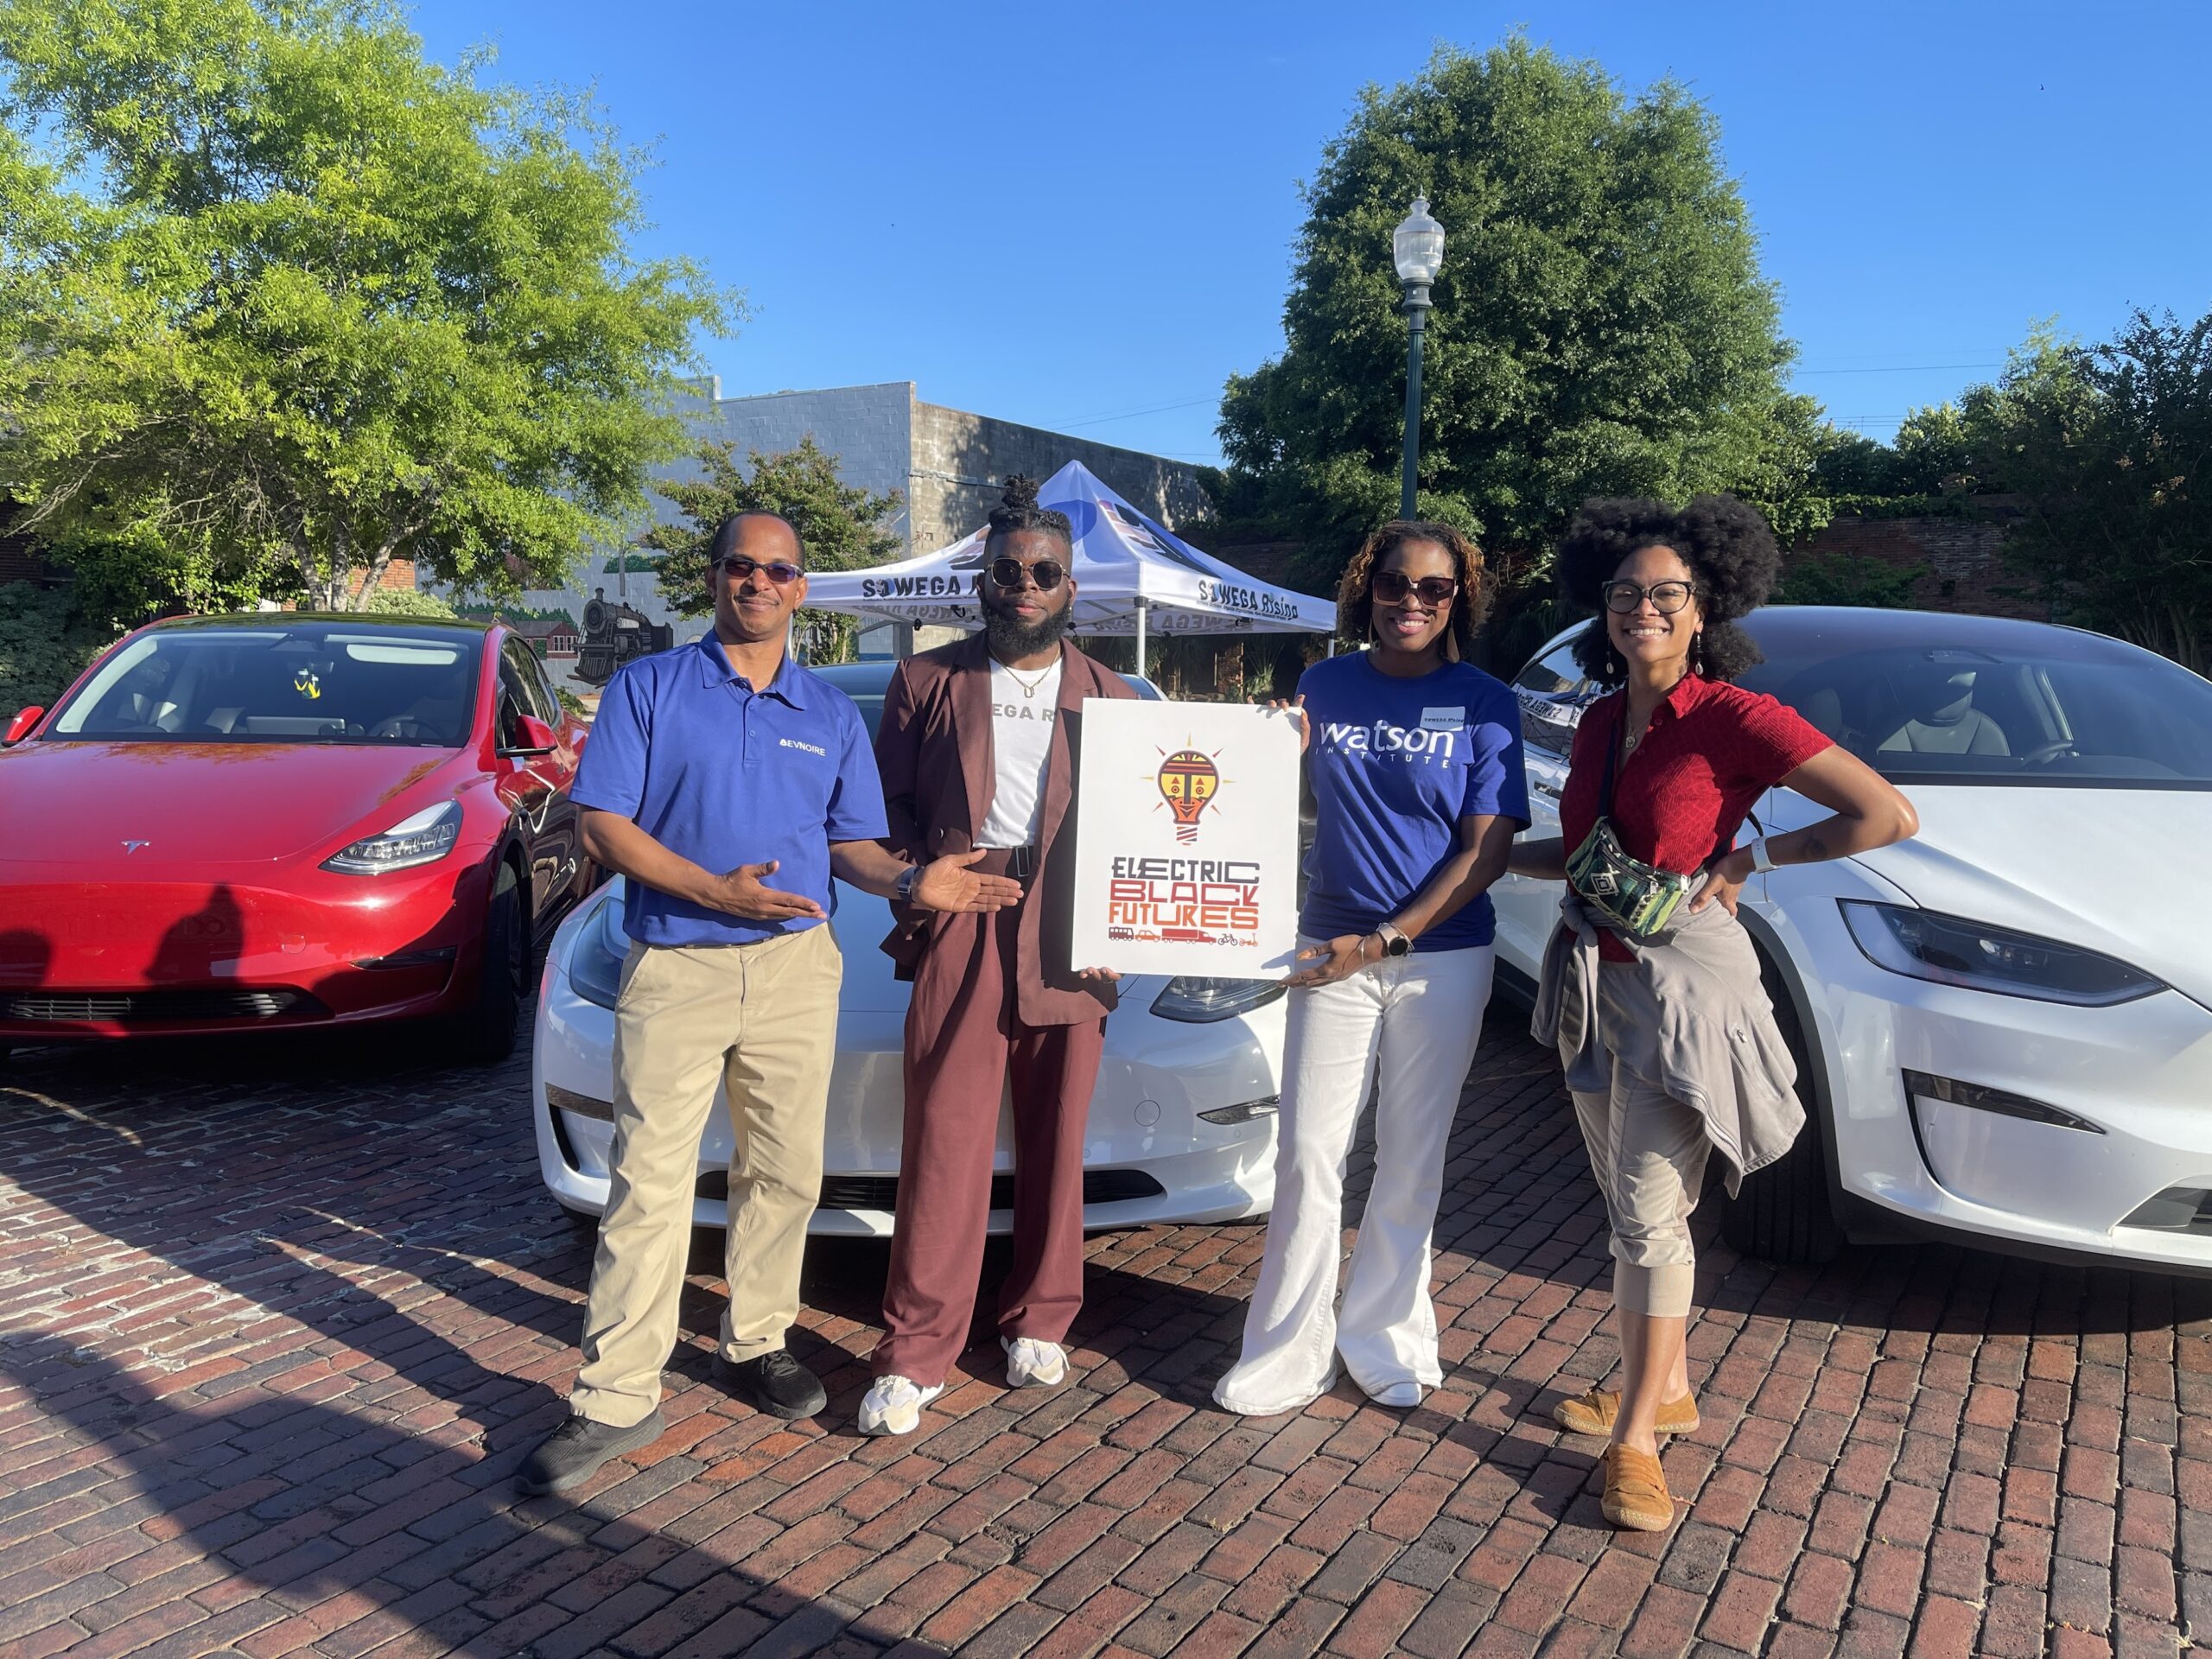 Electric Black Futures Partners Celebrate Earth Day and the Rich Heritage - and Future - of Albany - SACE | Southern Alliance for Clean Energy